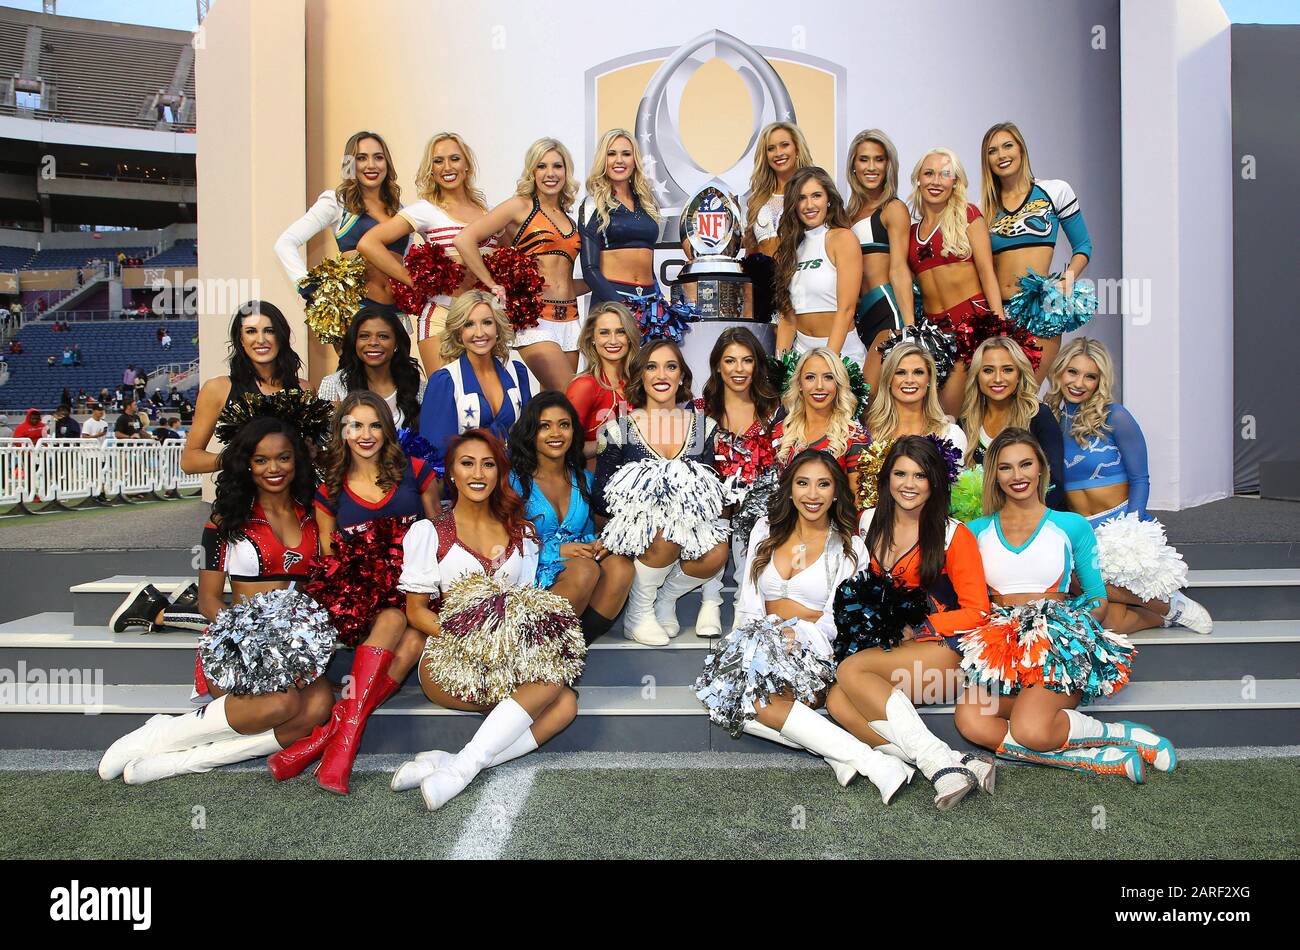 Both the AFC and NFC cheerleaders pose with the trophy after the Pro Bowl, Sunday, Jan. 26, 2020, at Camping World Stadium in  Orlando, Florida. (Photo by IOS/ESPA-Images) Stock Photo